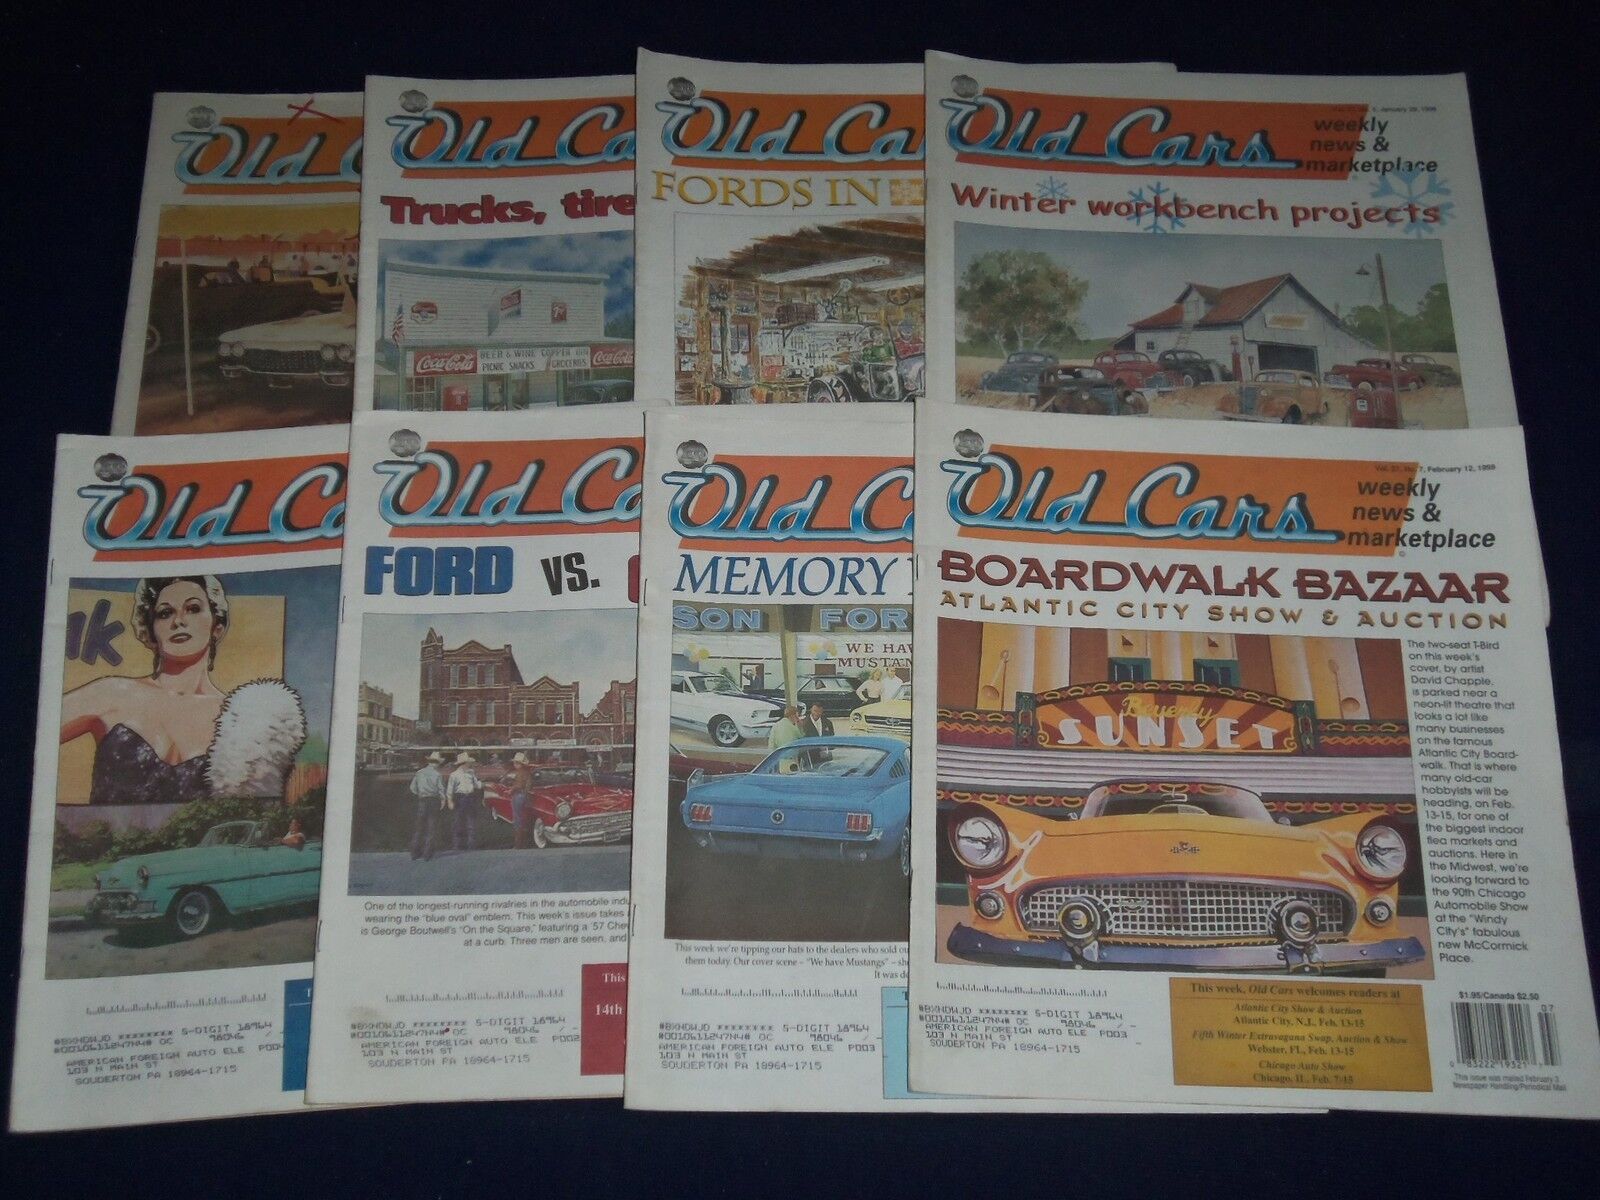 1998 OLD CARS WEEKLY NEWS & MARKETPLACE LOT OF 43 - PHOTOS + ADS - O 2297